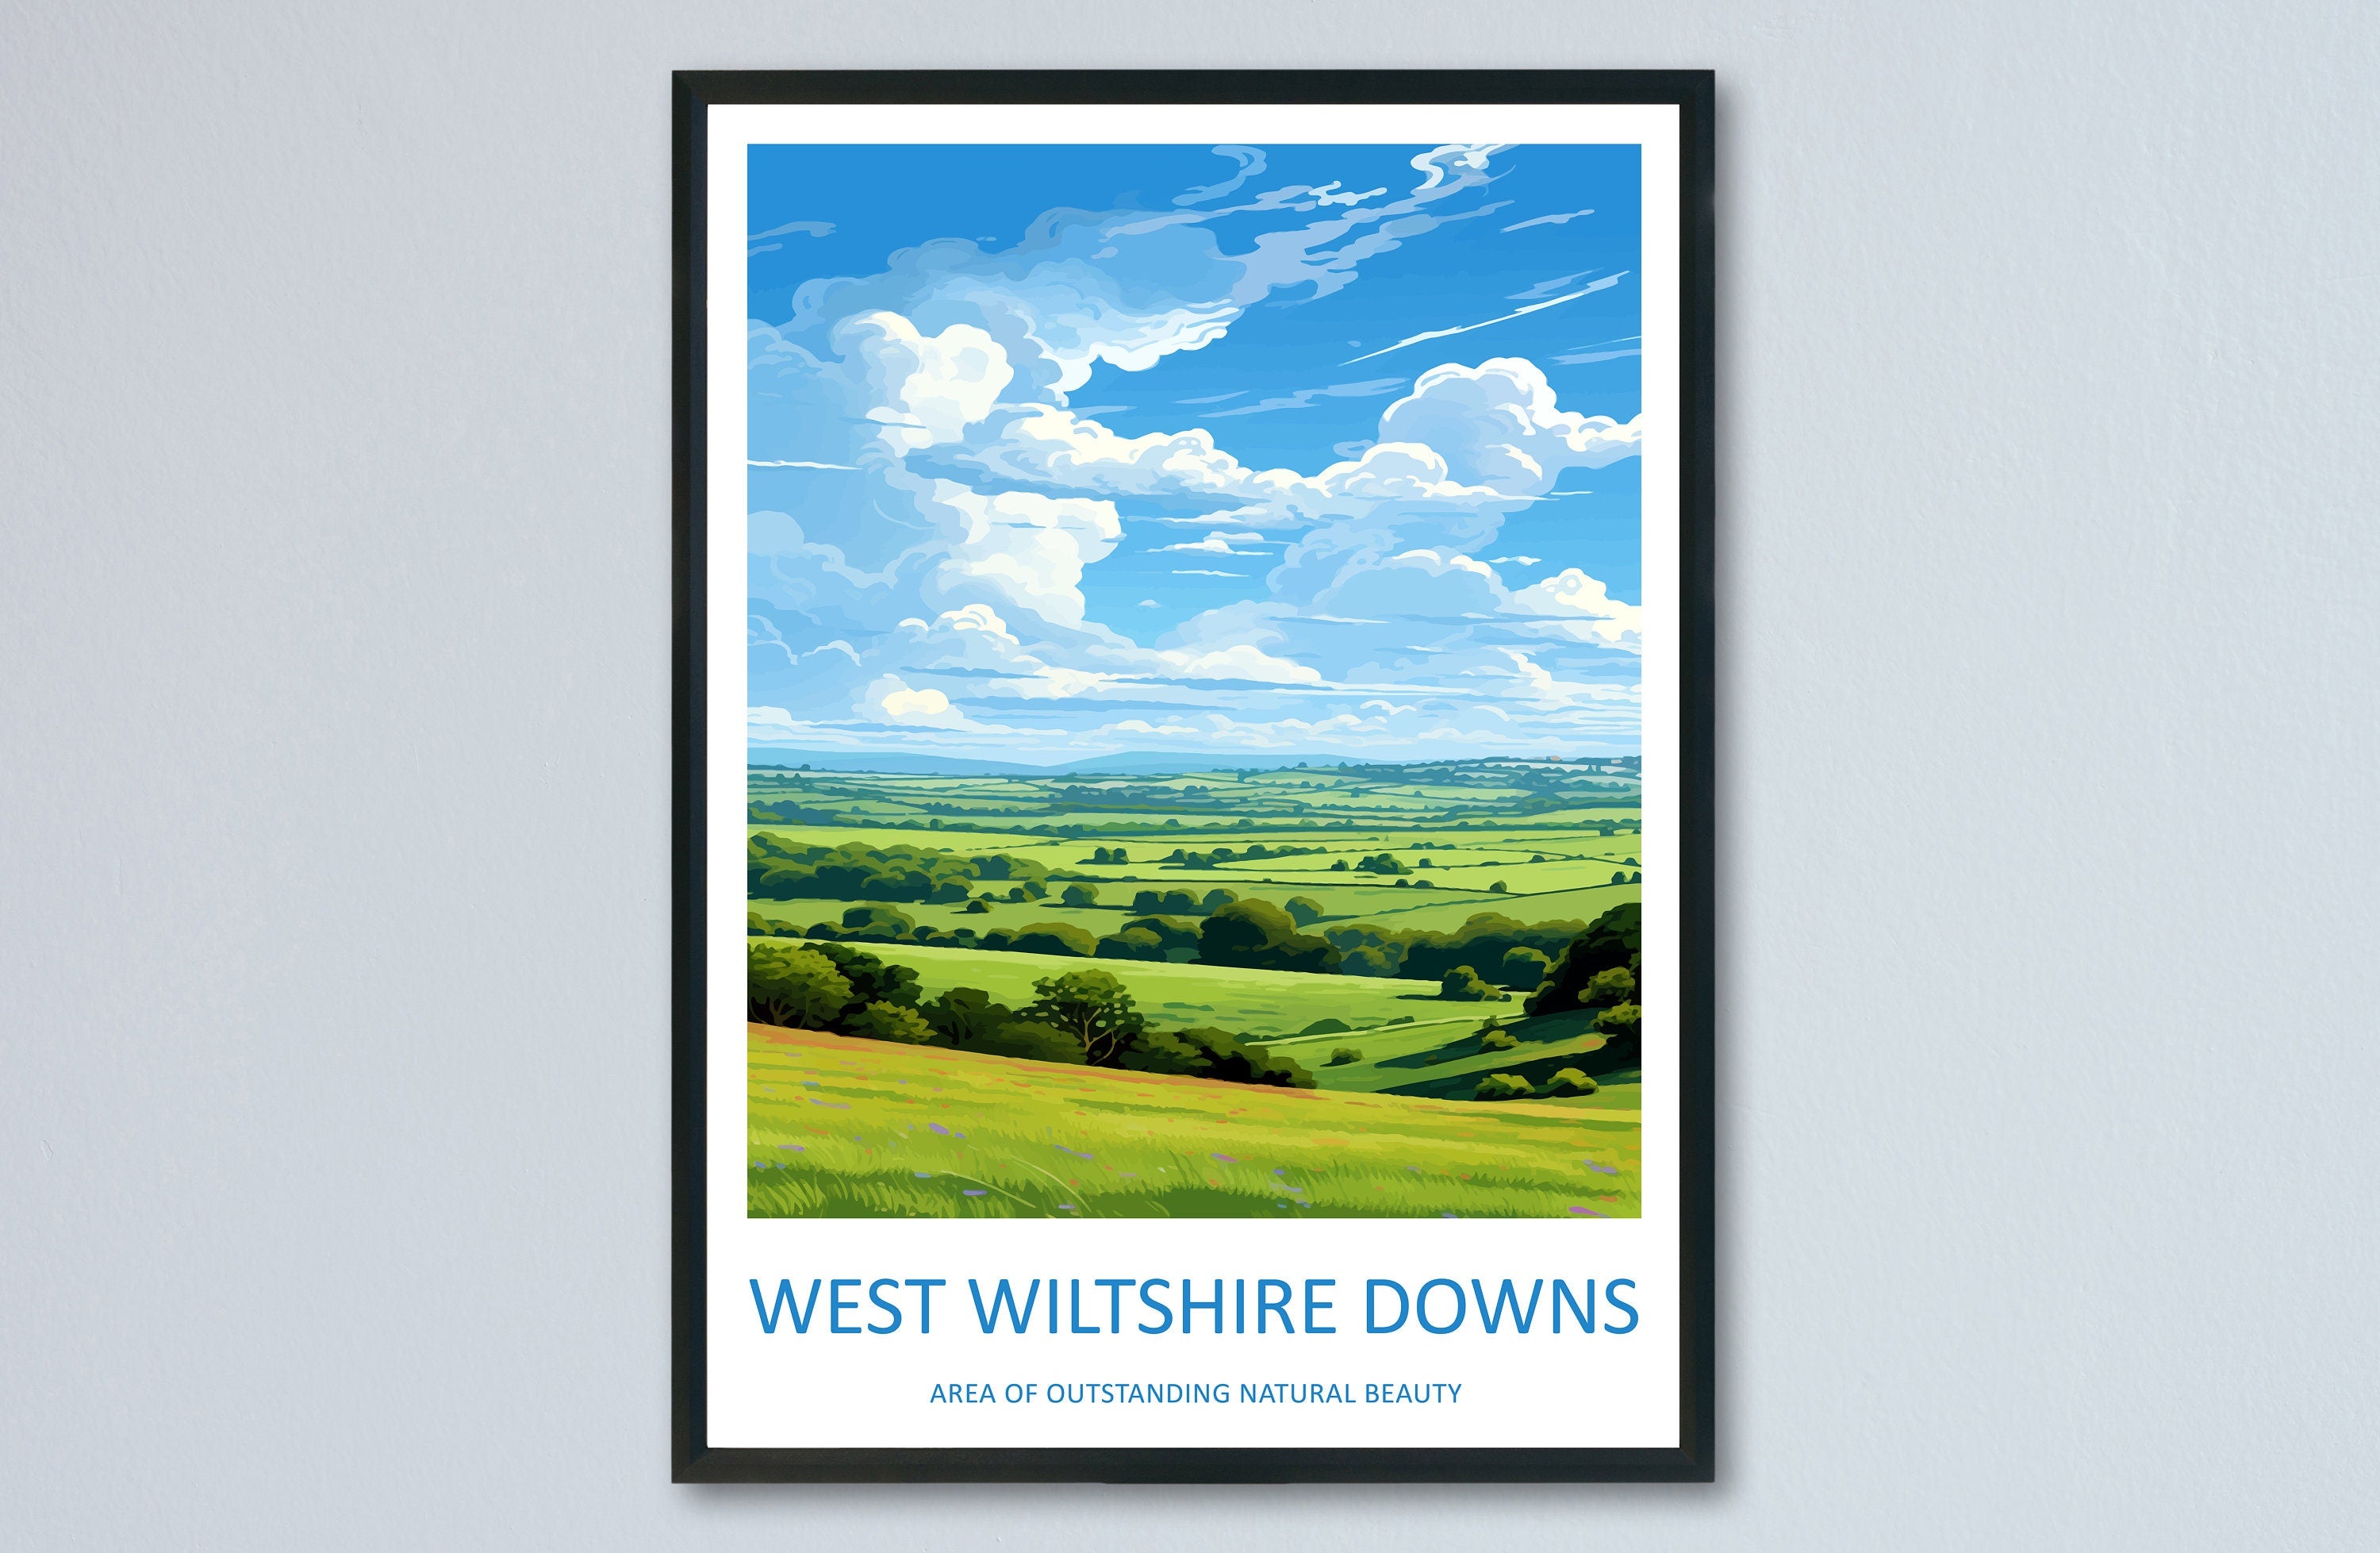 West Wiltshire Downs Travel Print Wall Art West Wiltshire Downs Wall Hanging Home Decor West Wiltshire Downs Gift Art Lovers Wall Art AONB